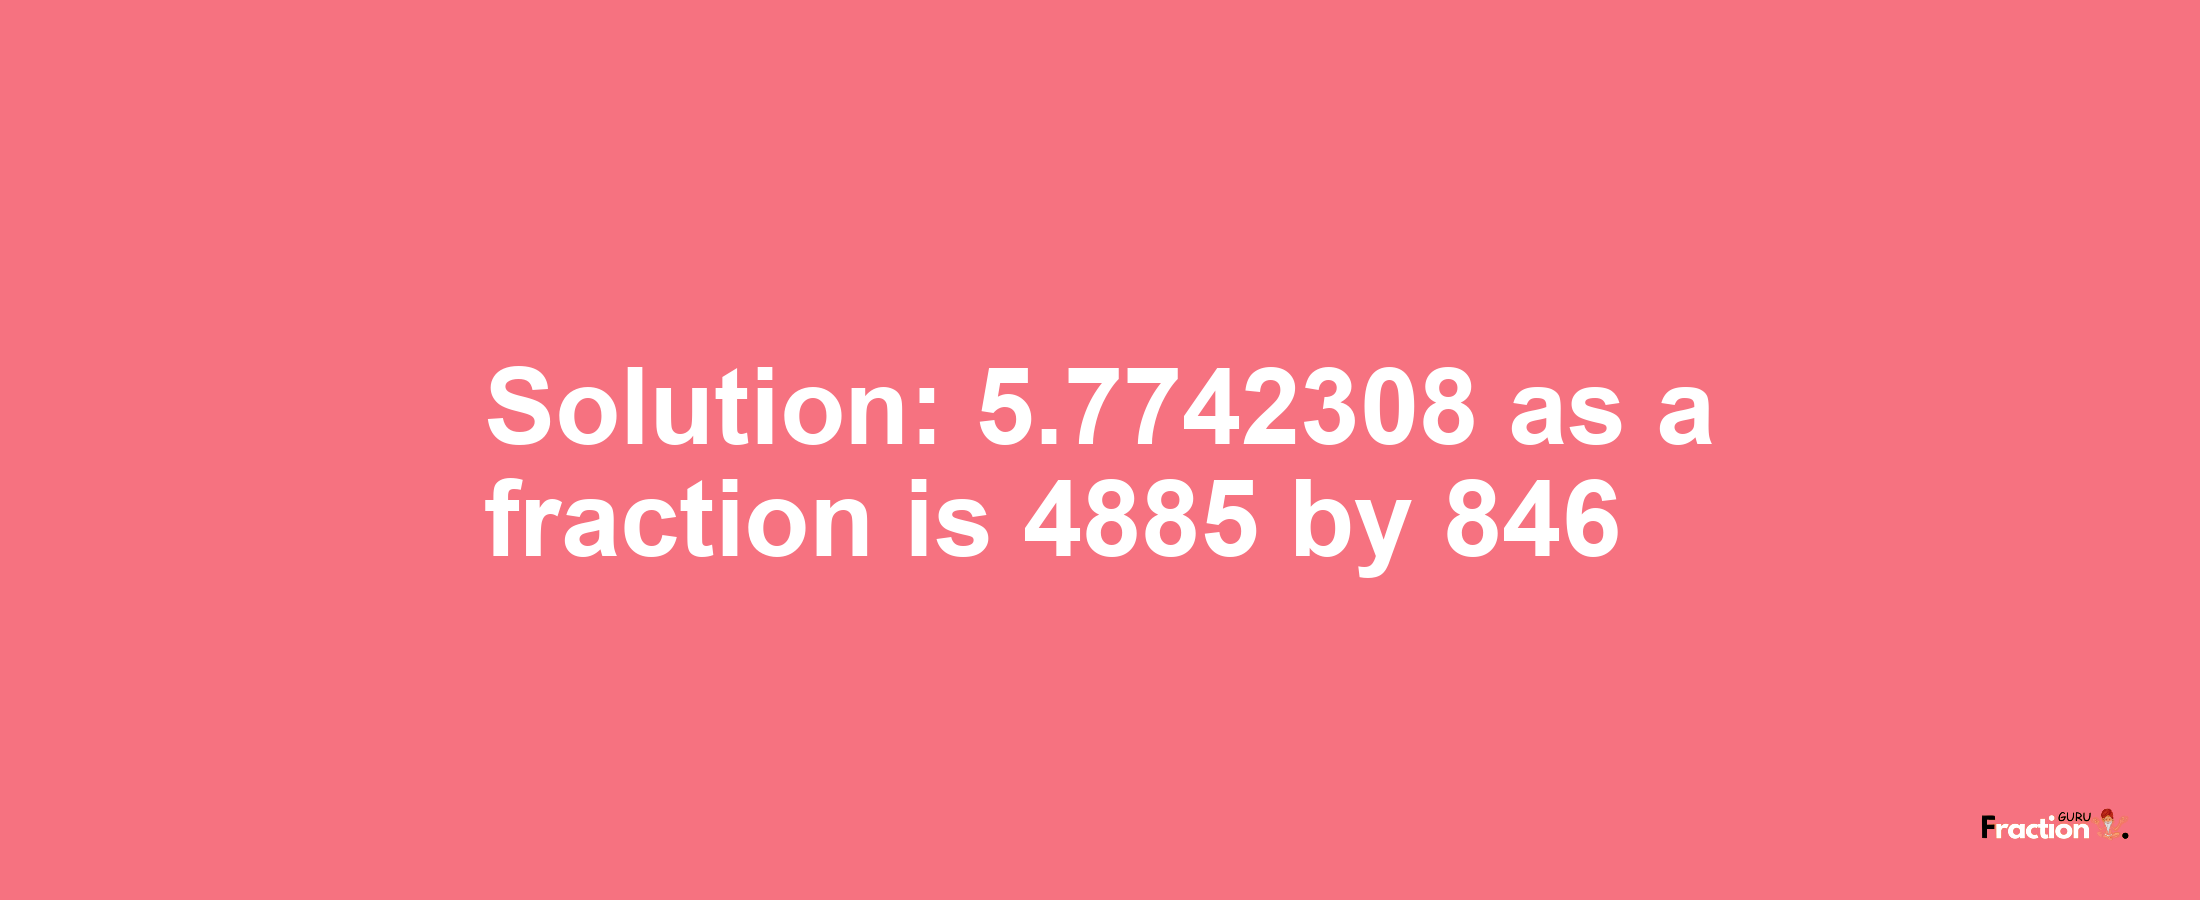 Solution:5.7742308 as a fraction is 4885/846